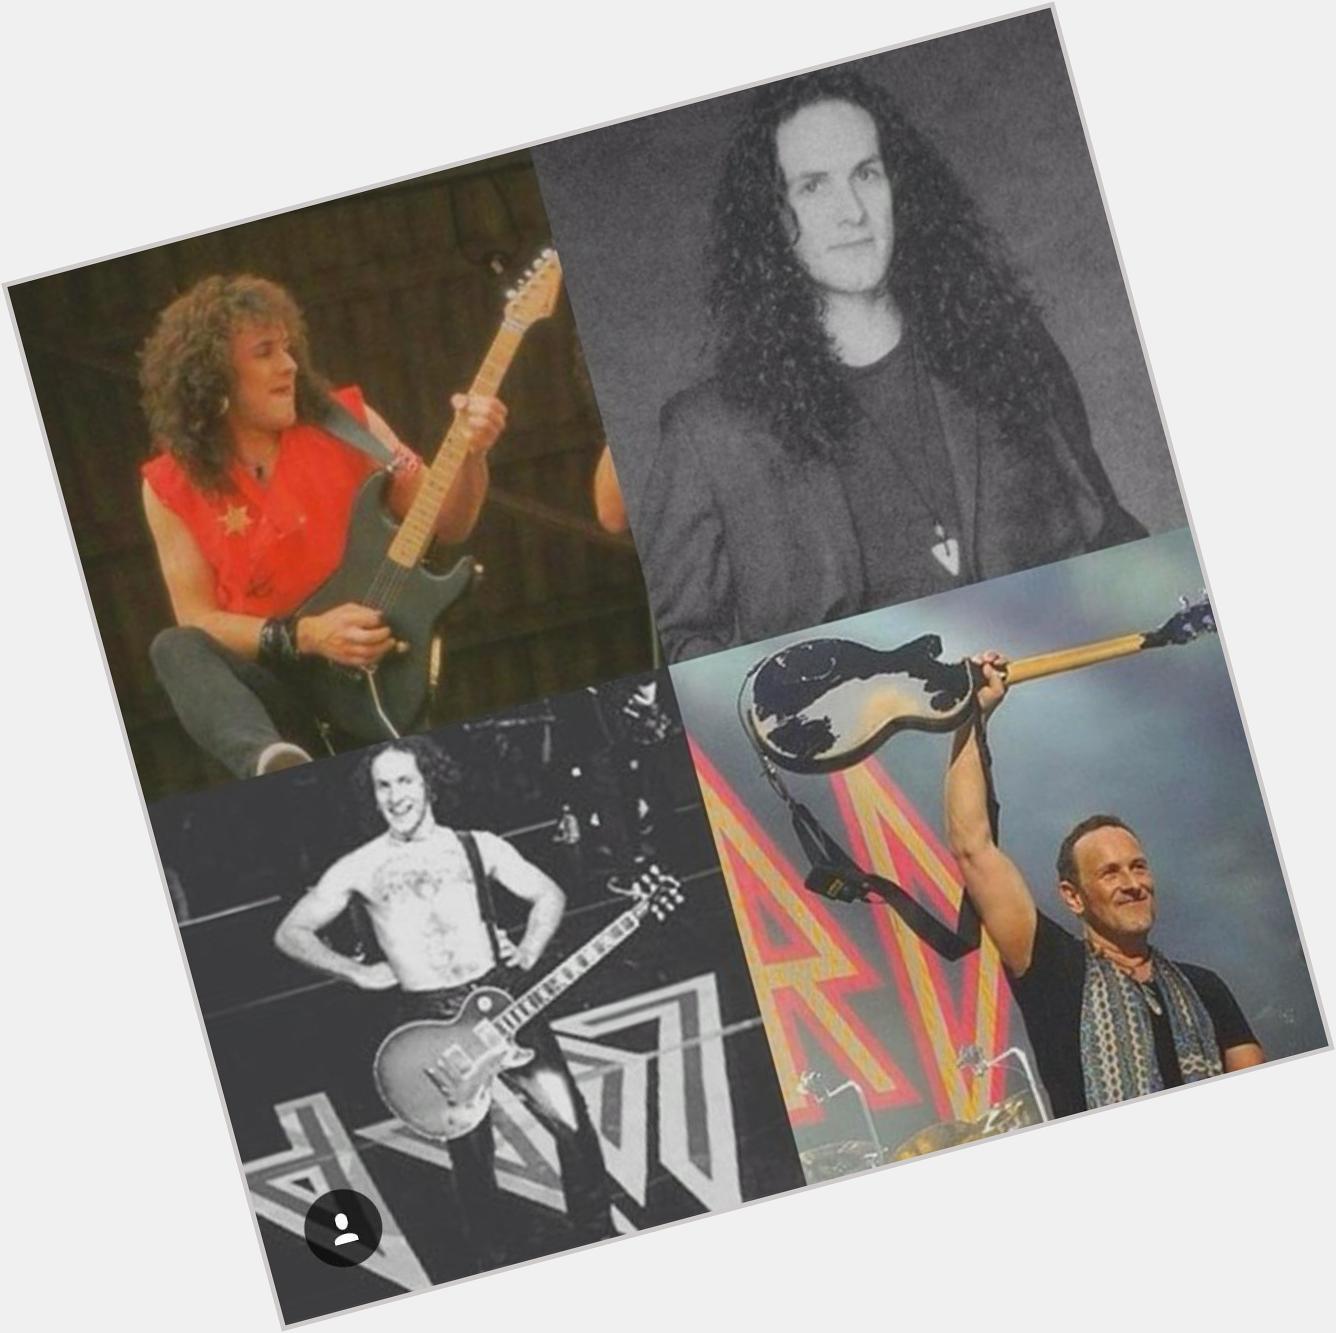 Also join Rock Out Loud in wishing \s Vivian Campbell a very happy birthday! 